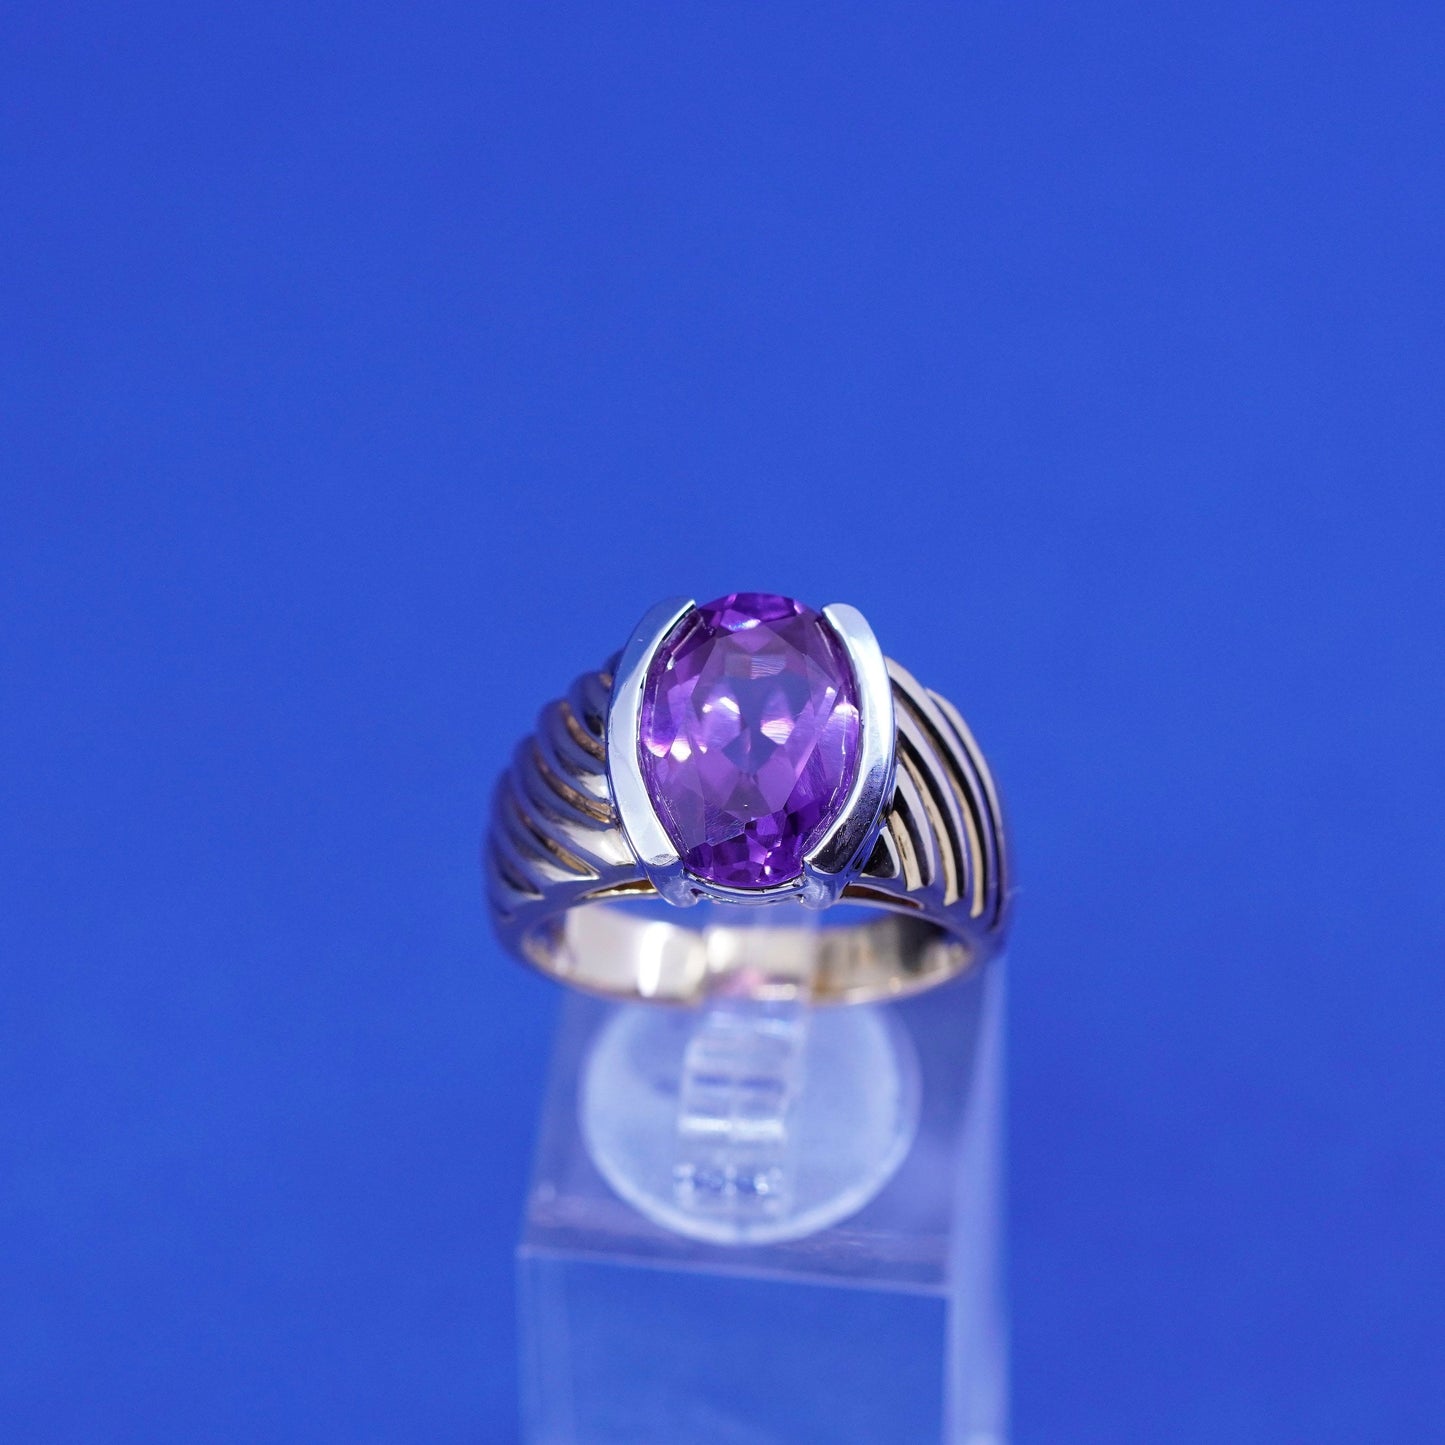 Size 10, vermeil gold over sterling 925 silver ribbed ring w/ oval amethyst